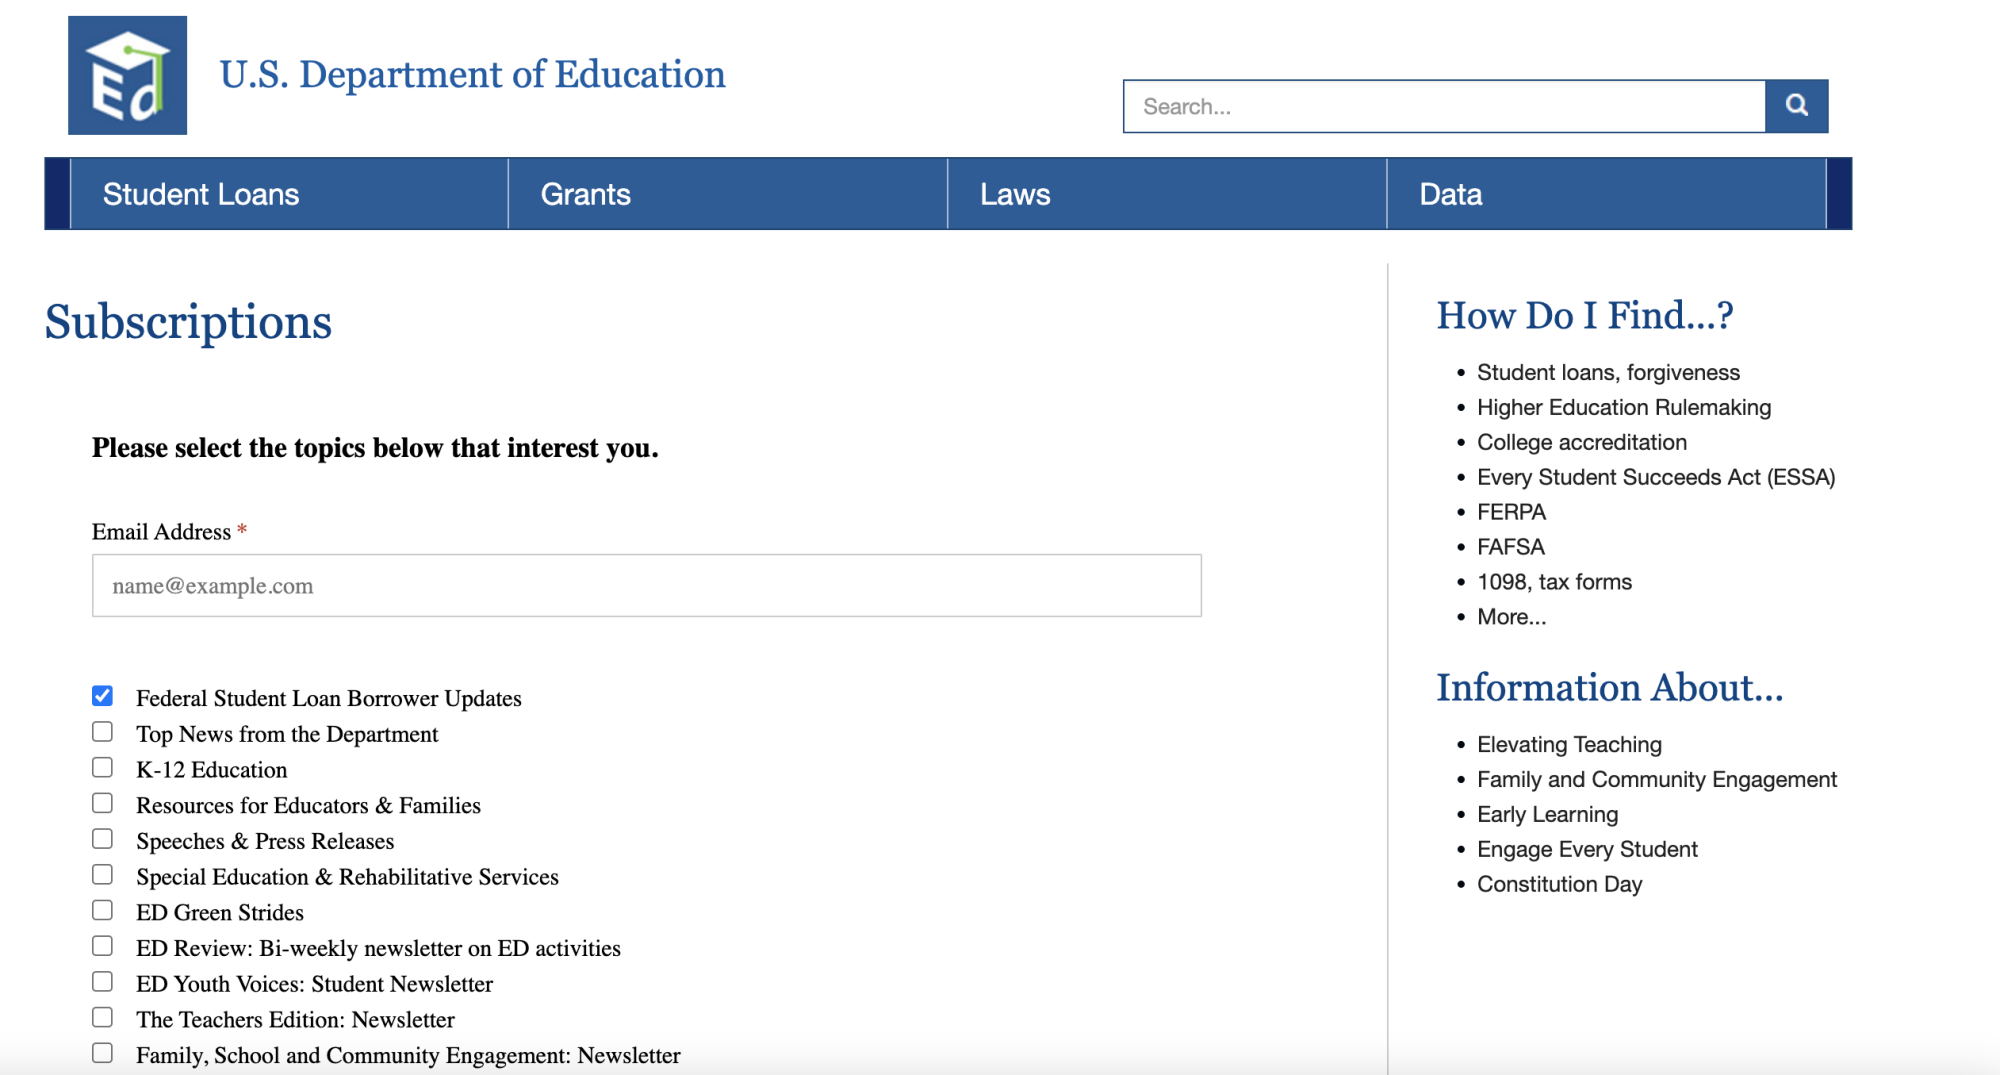 A screenshot of the U.S. Department of Education subscription site. Below a box to submit your email, there is blue check mark next to the option "Federal Student Loan Borrower Updates".